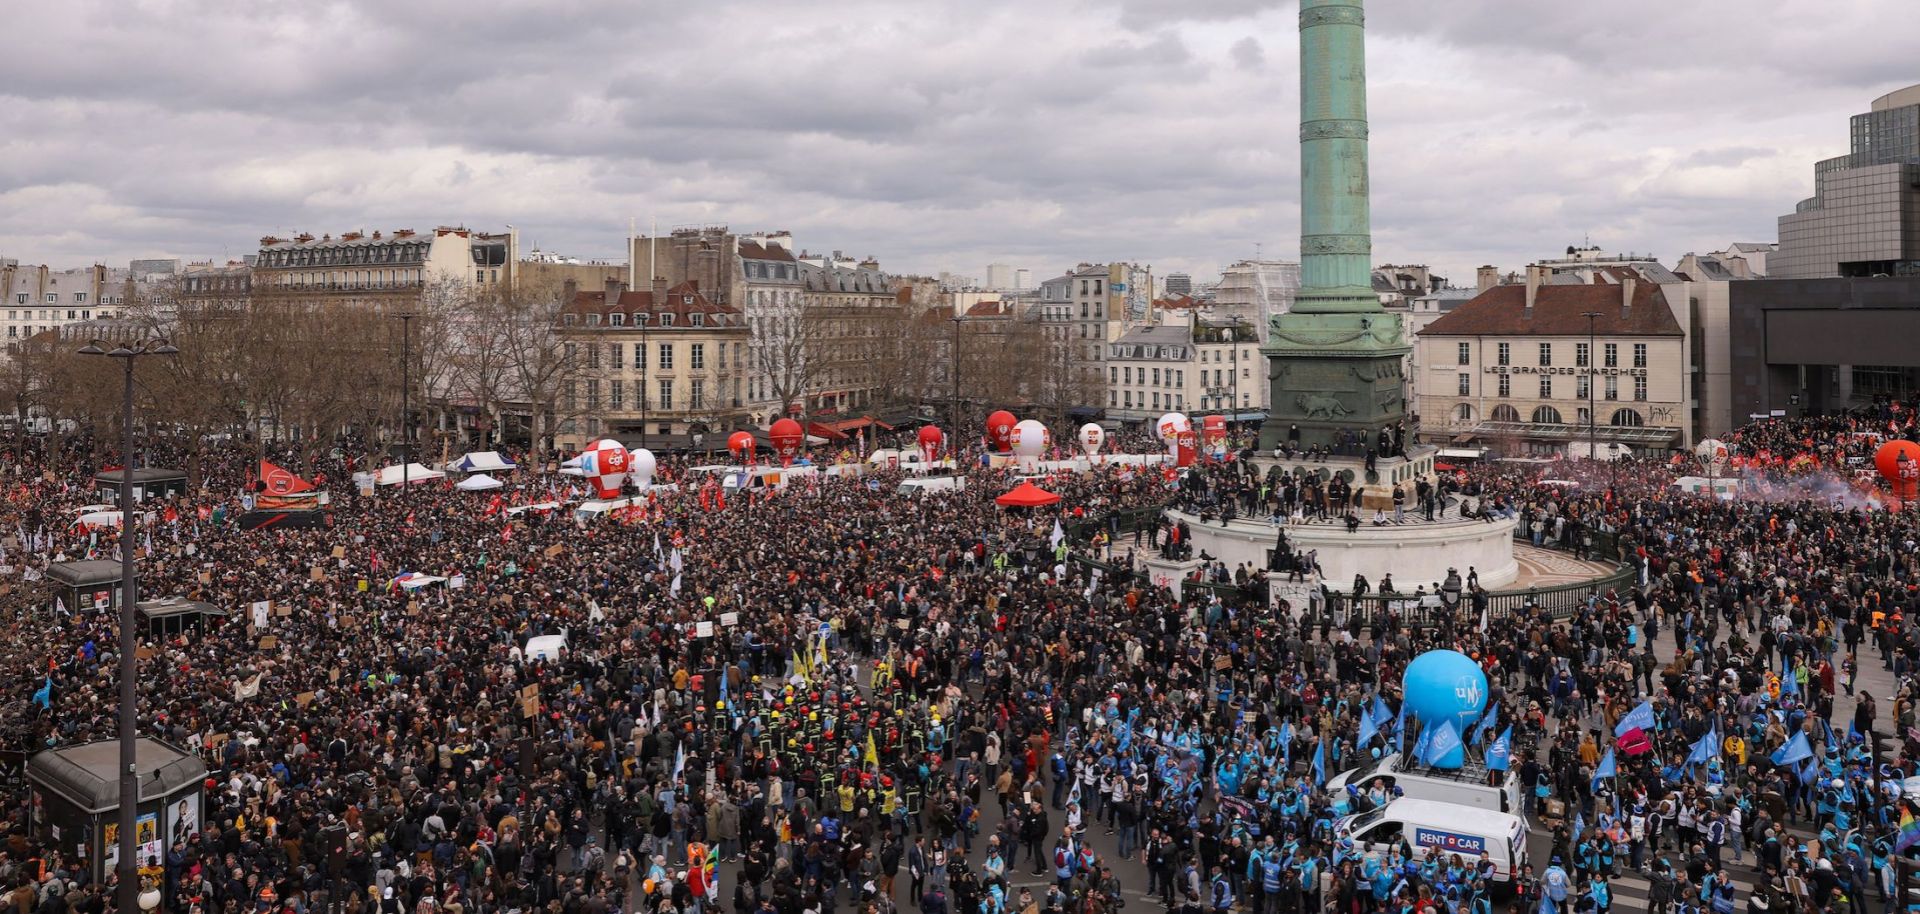 Protesters gather on Place de la Bastille in Paris, France, on March 23, 2023, to attend a demonstration a week after the government pushed a pension reform through Parliament without a vote.